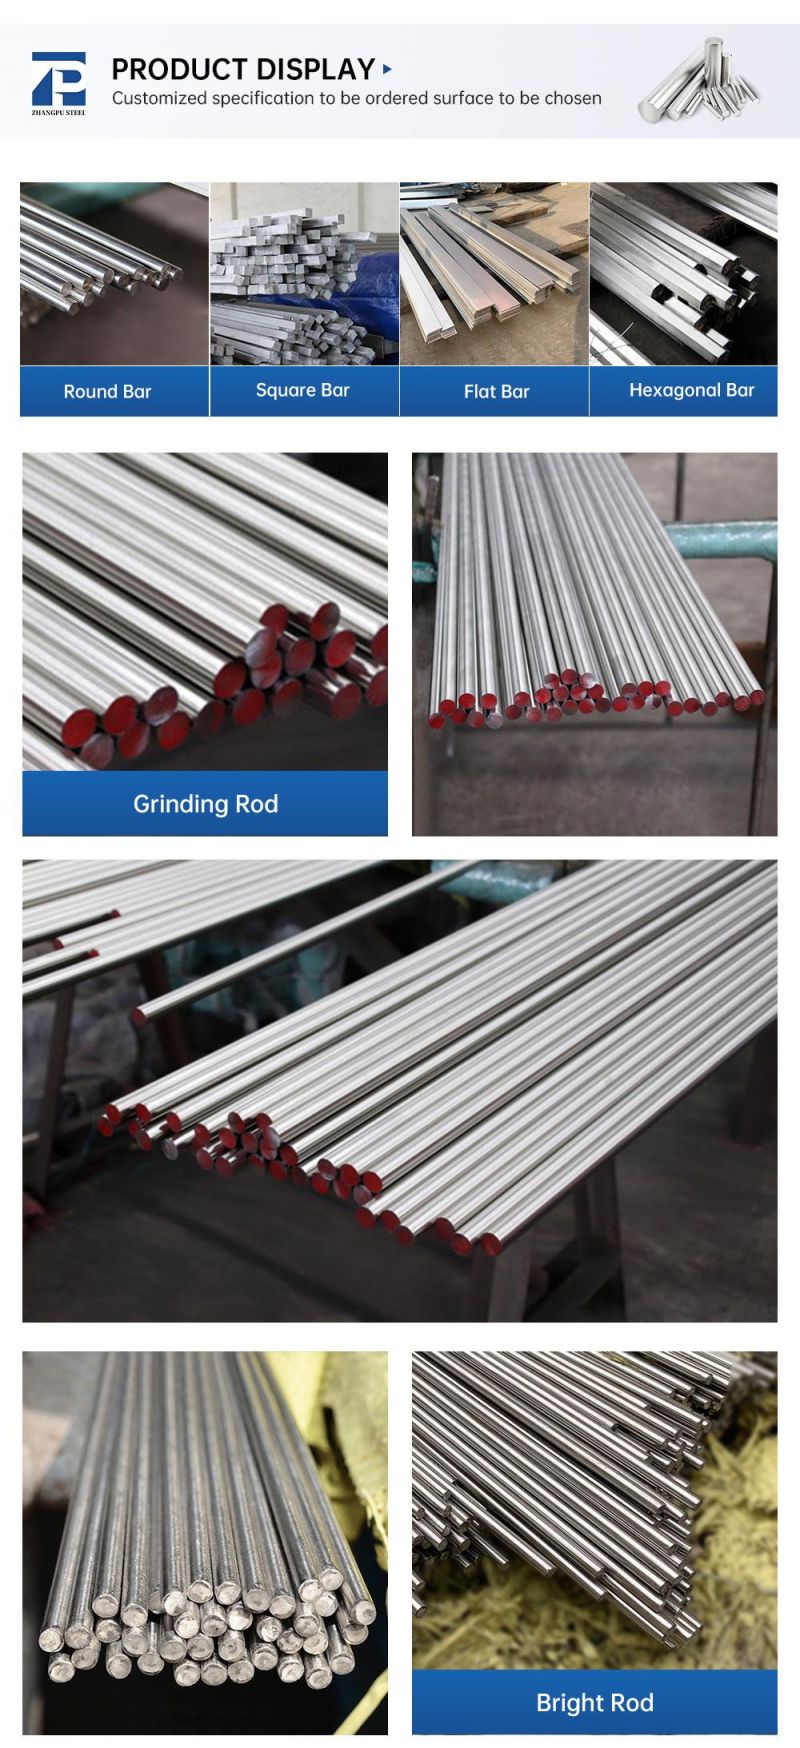 Stainless Steel Bar Stainless Bar 316 201 304 310 316 321 AISI Stainless Steel Square Bar